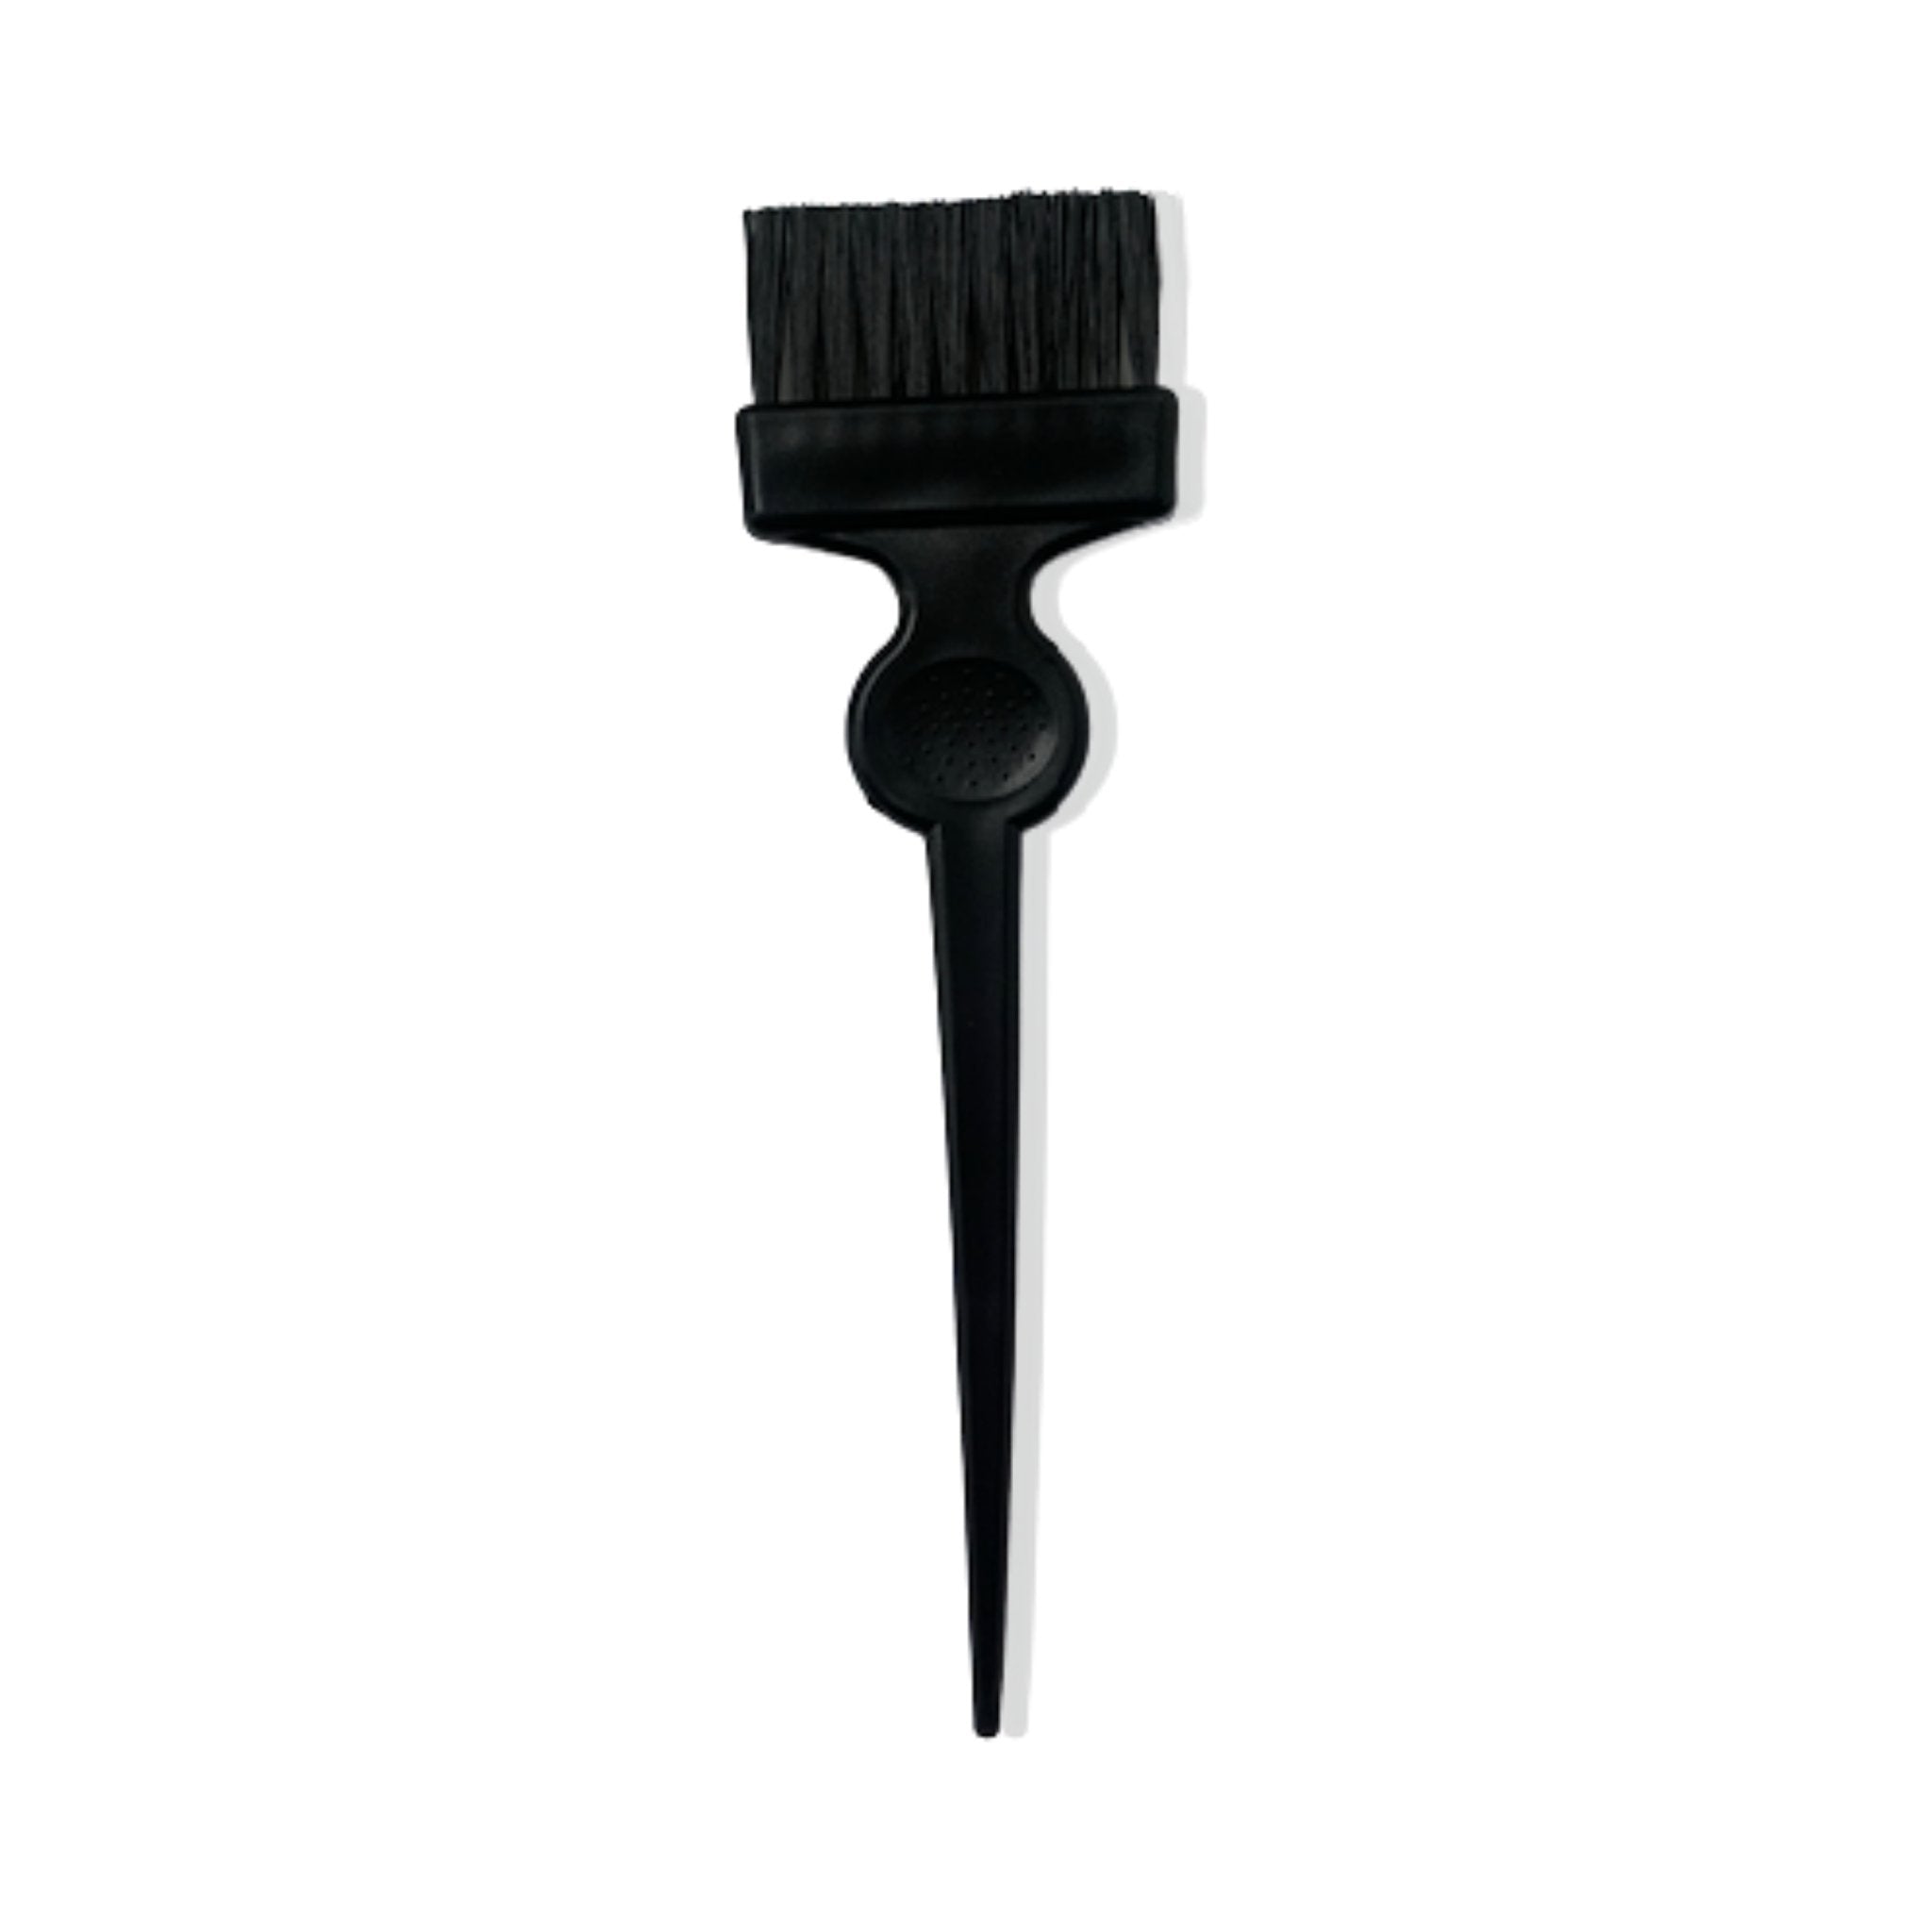 Termax Professional Firm Short Bristle Feathered Tint Brush v2 - HairBeautyInk